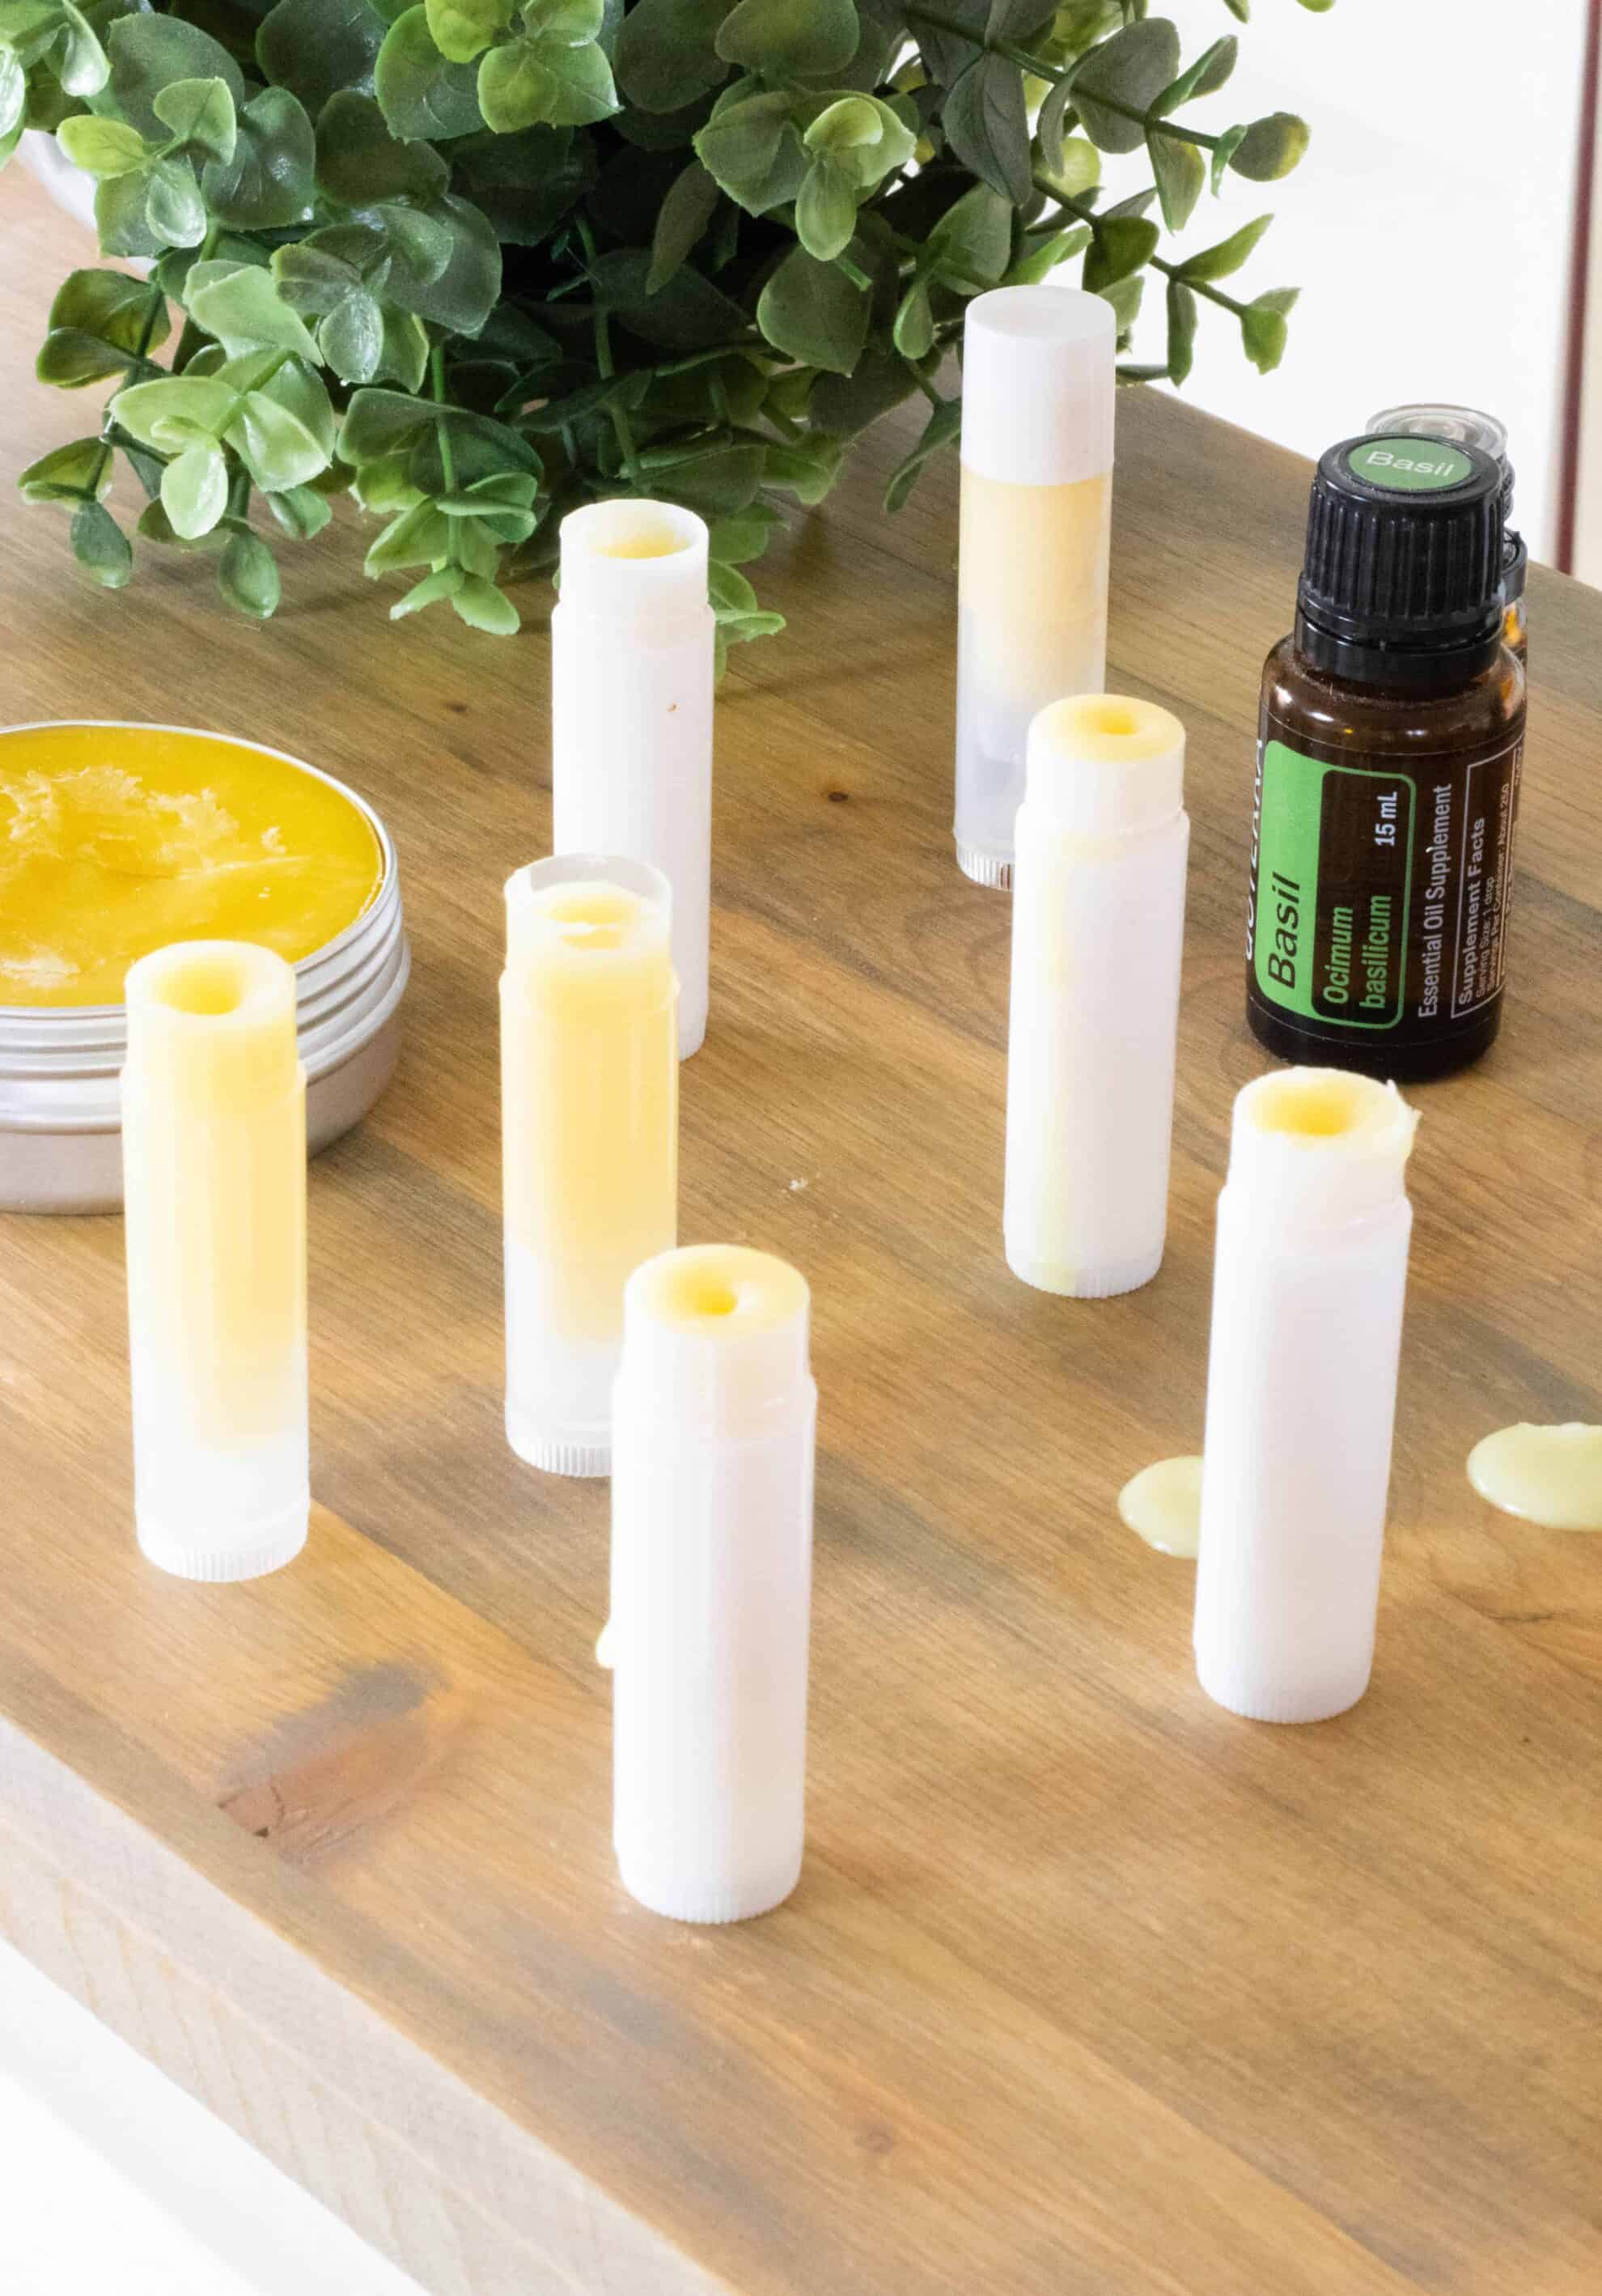 Homemade bug bite balm on wooden table with essential oil bottle.